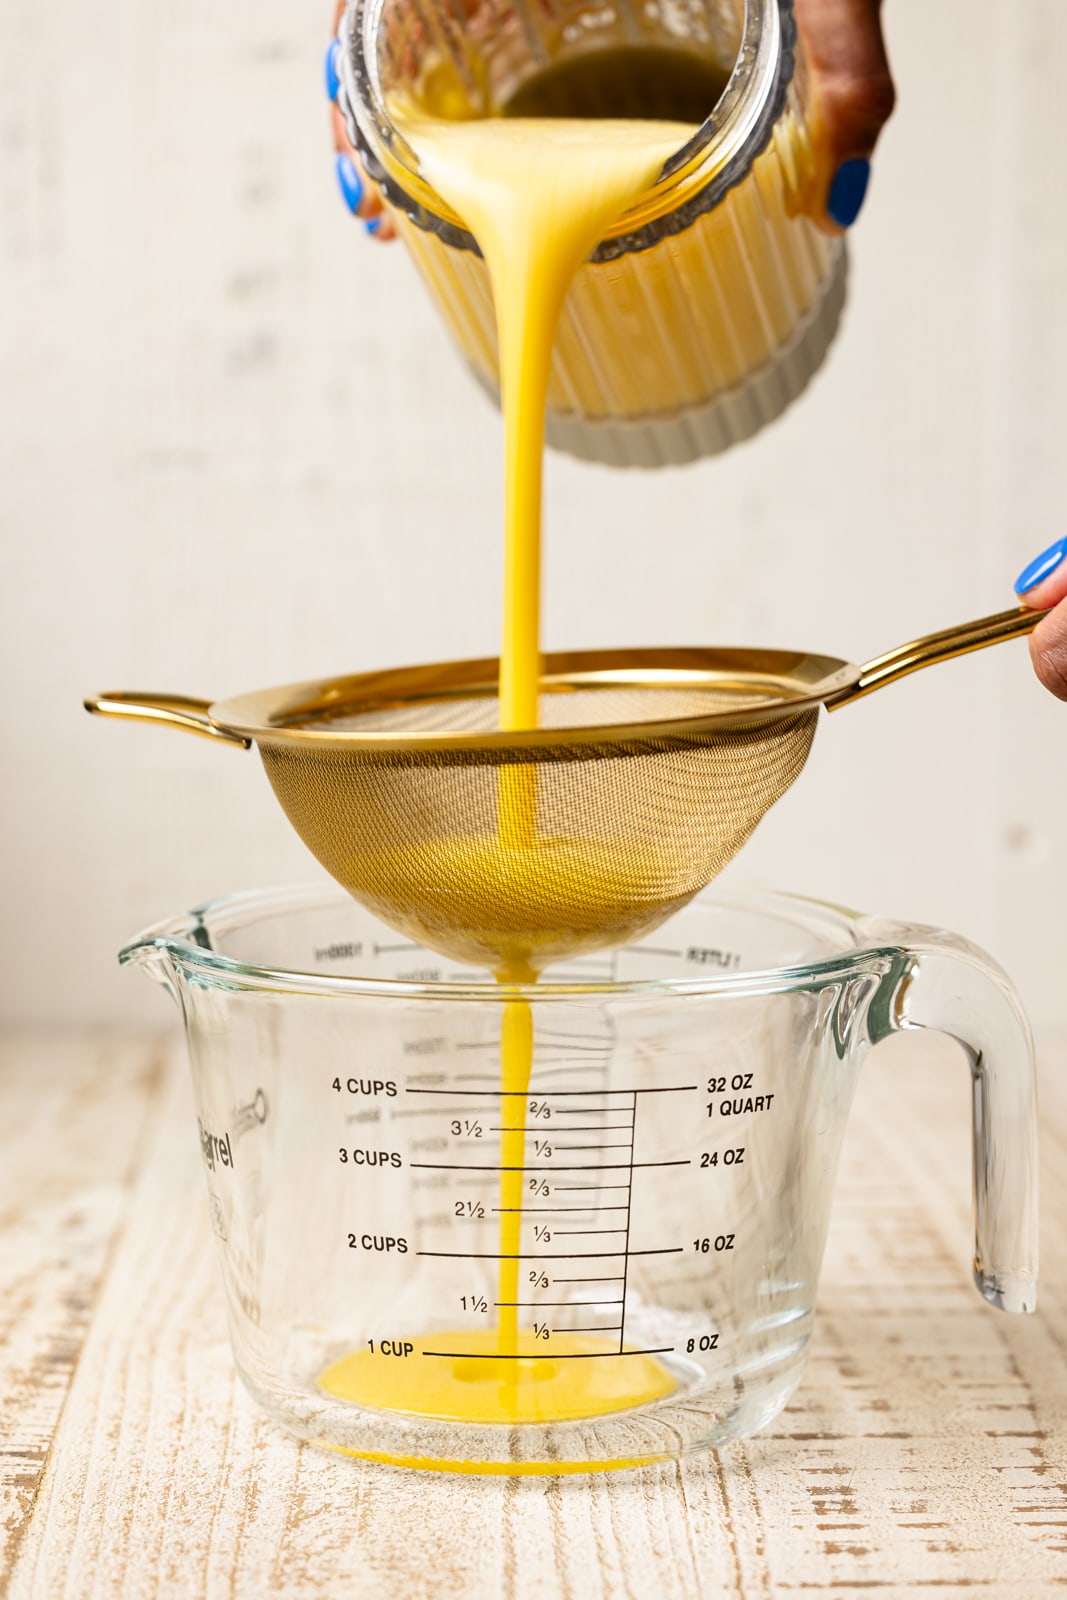 Pouring juice through a strainer in a measuring cup.